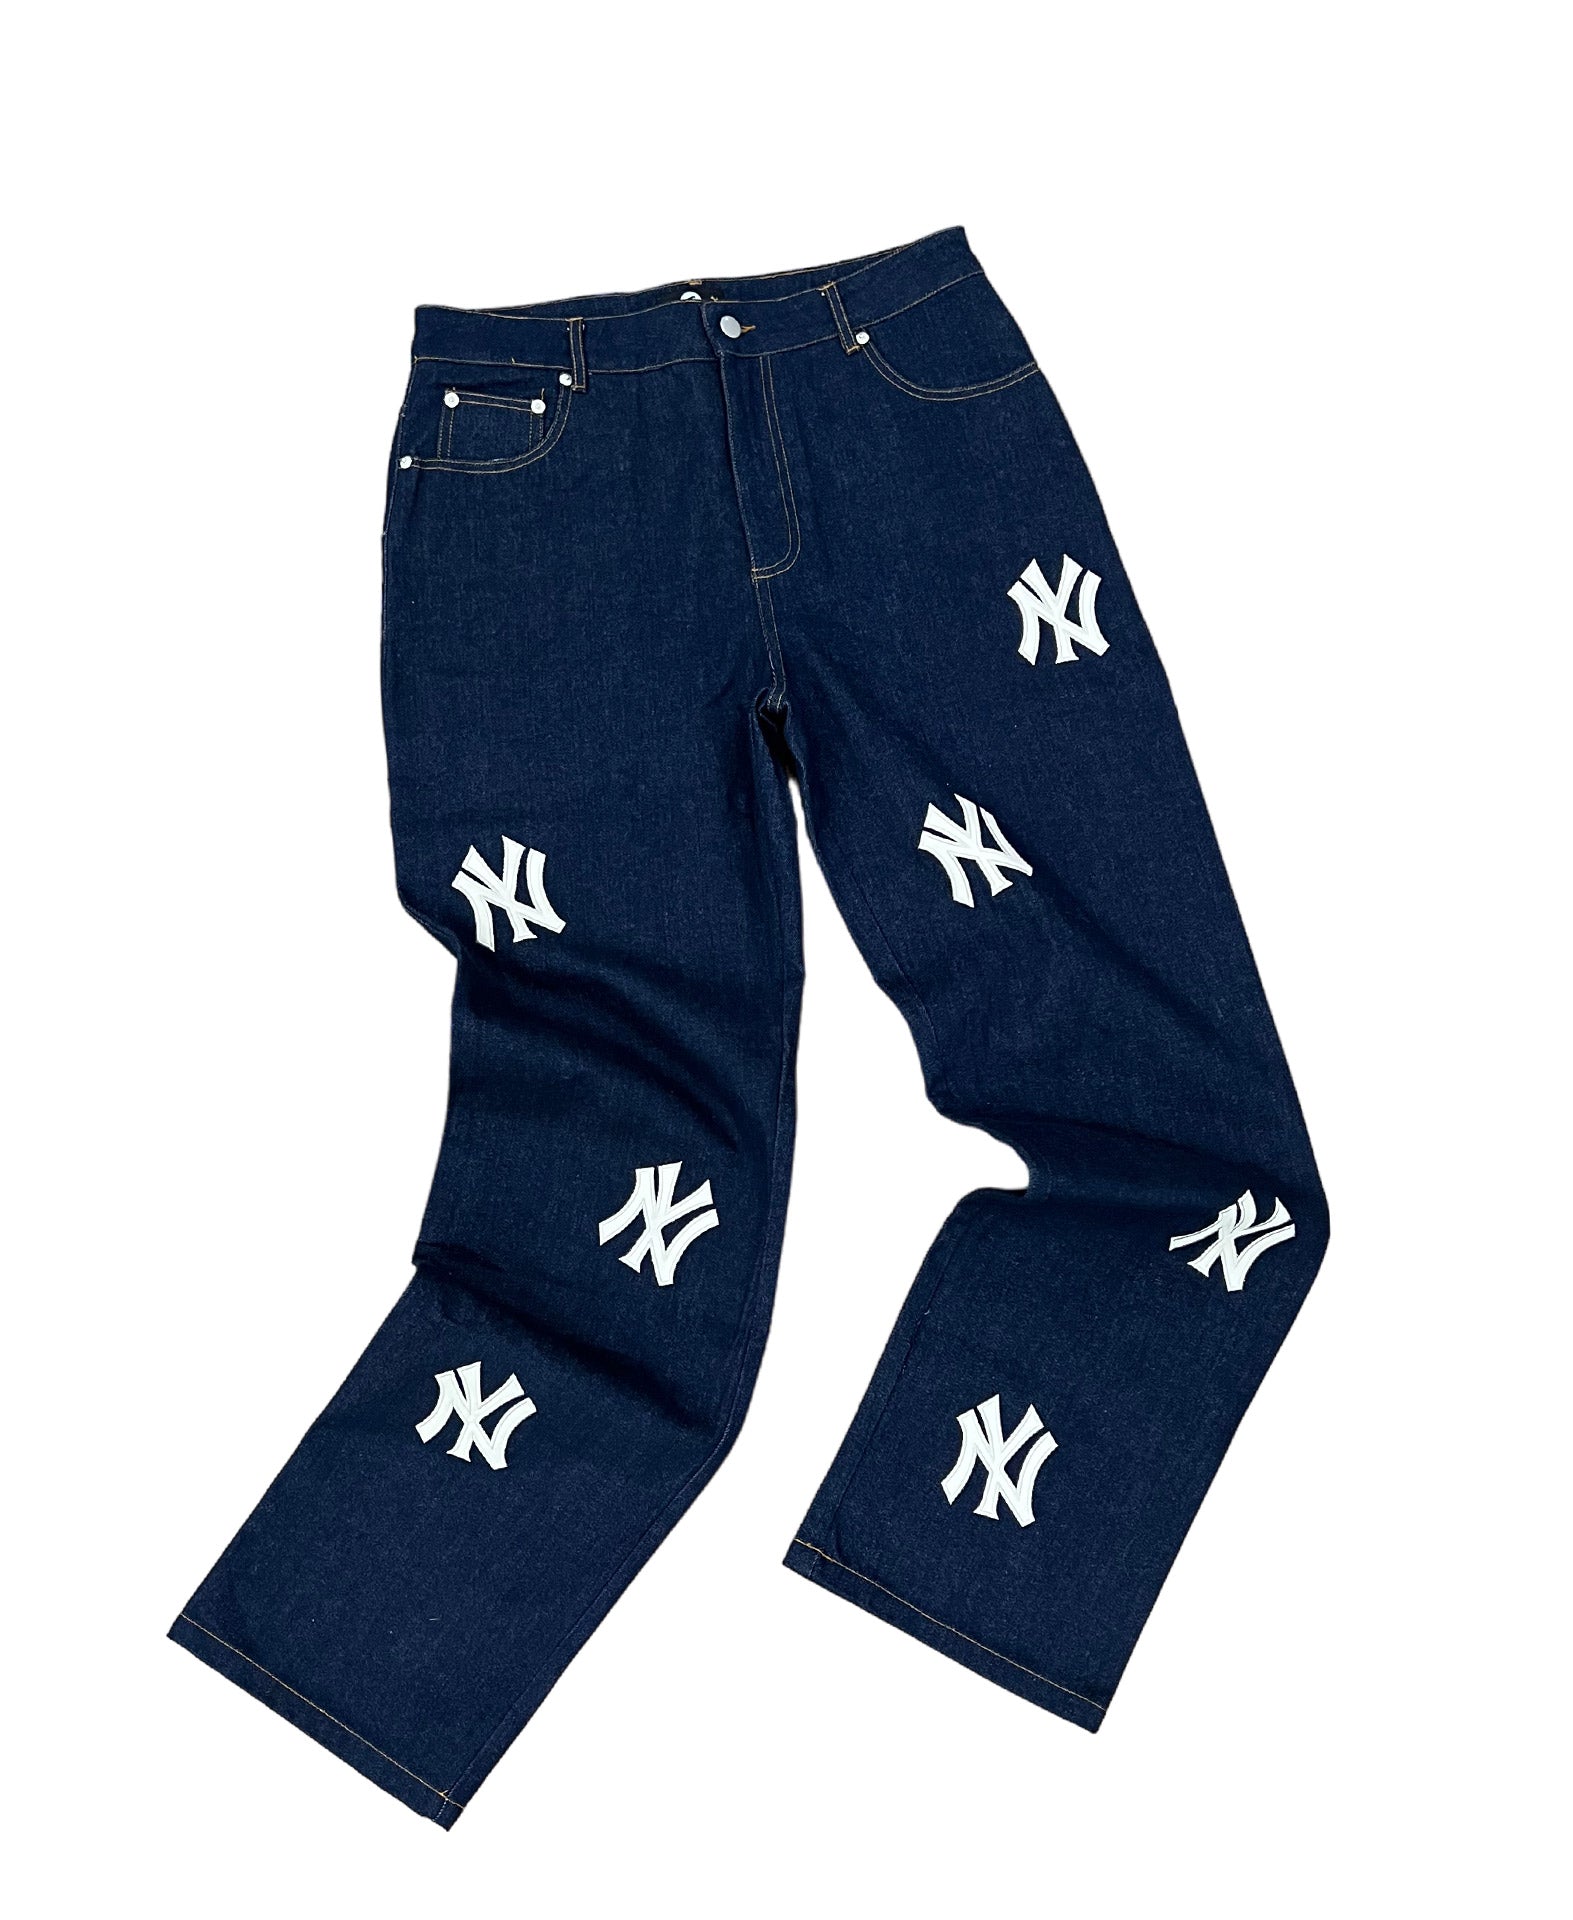 New York Patch Jeans ABSTRACTBYJULES - Navy –